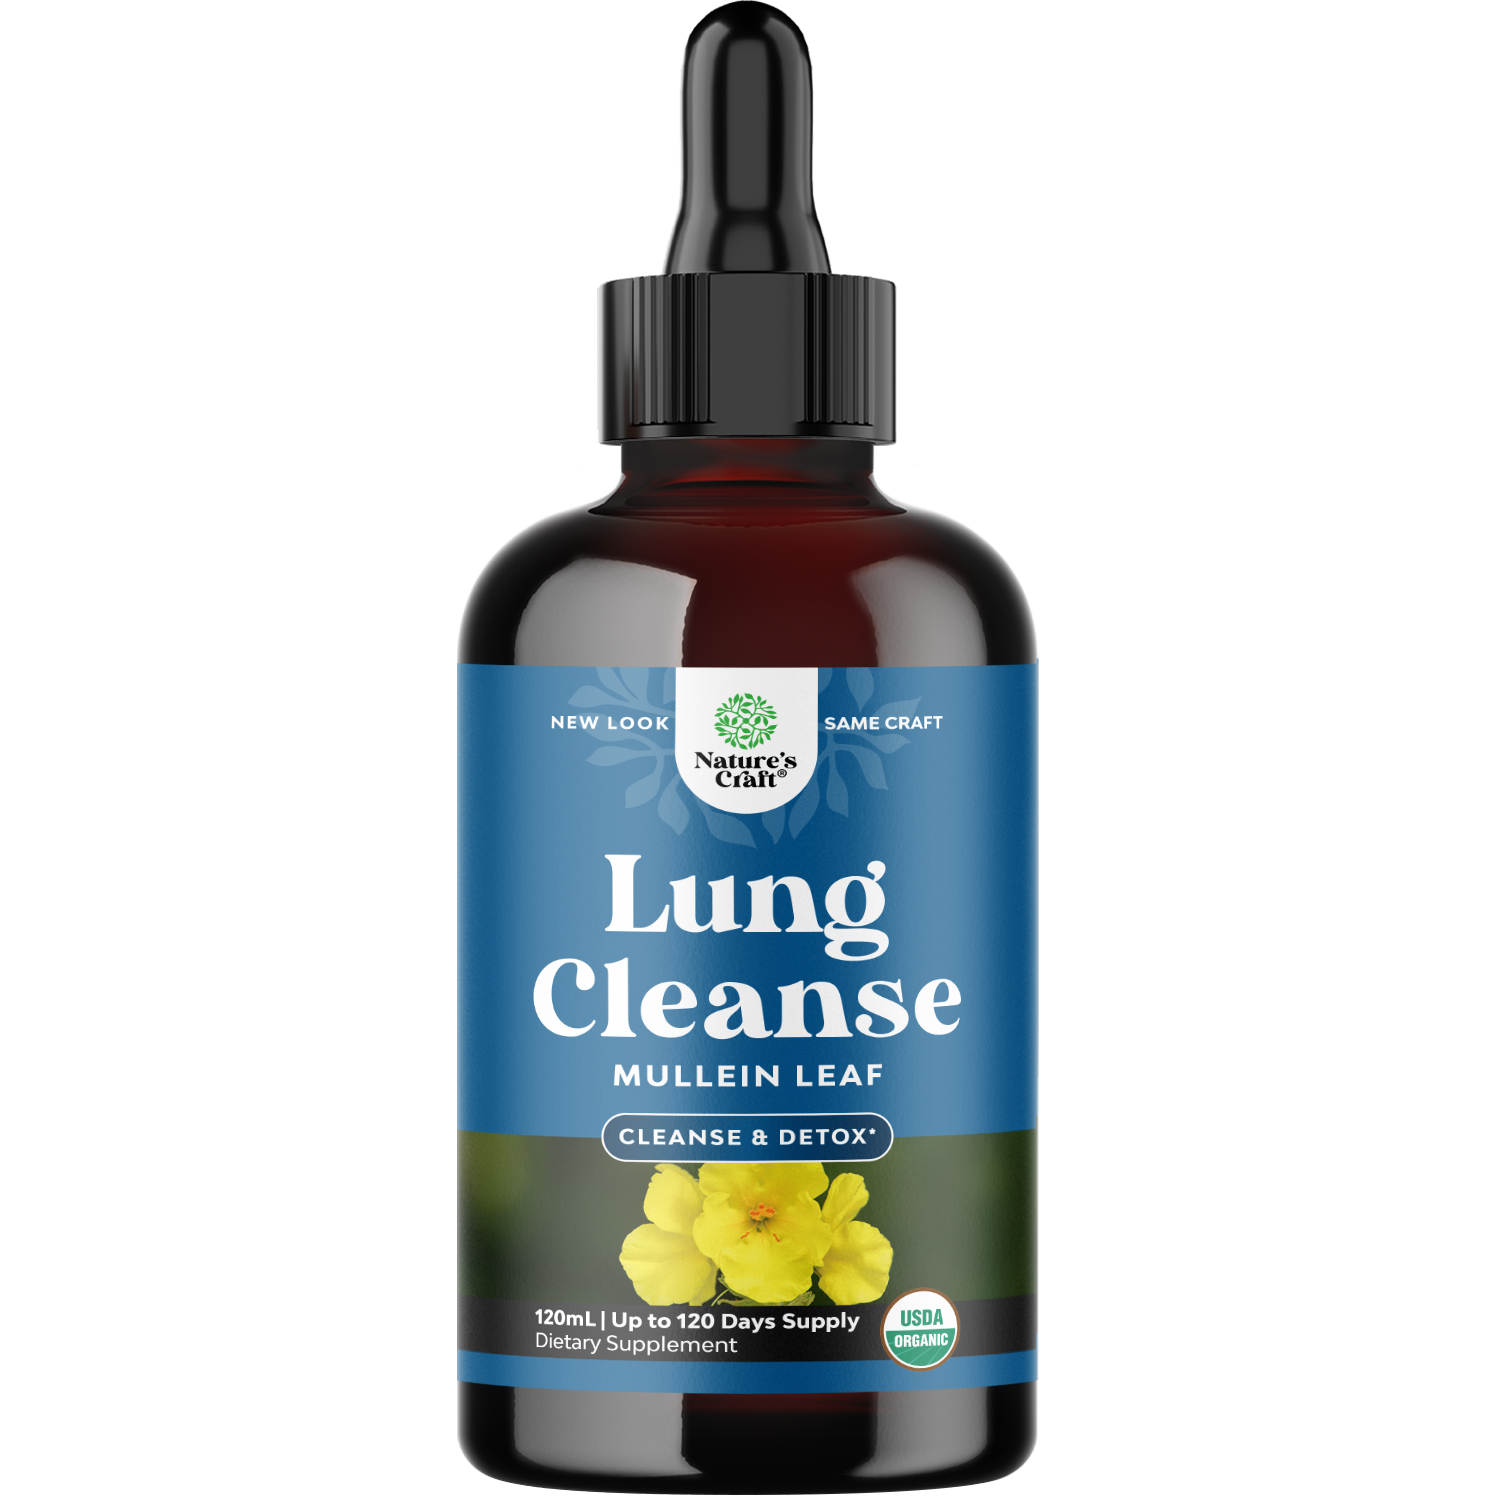 Lung Cleanse